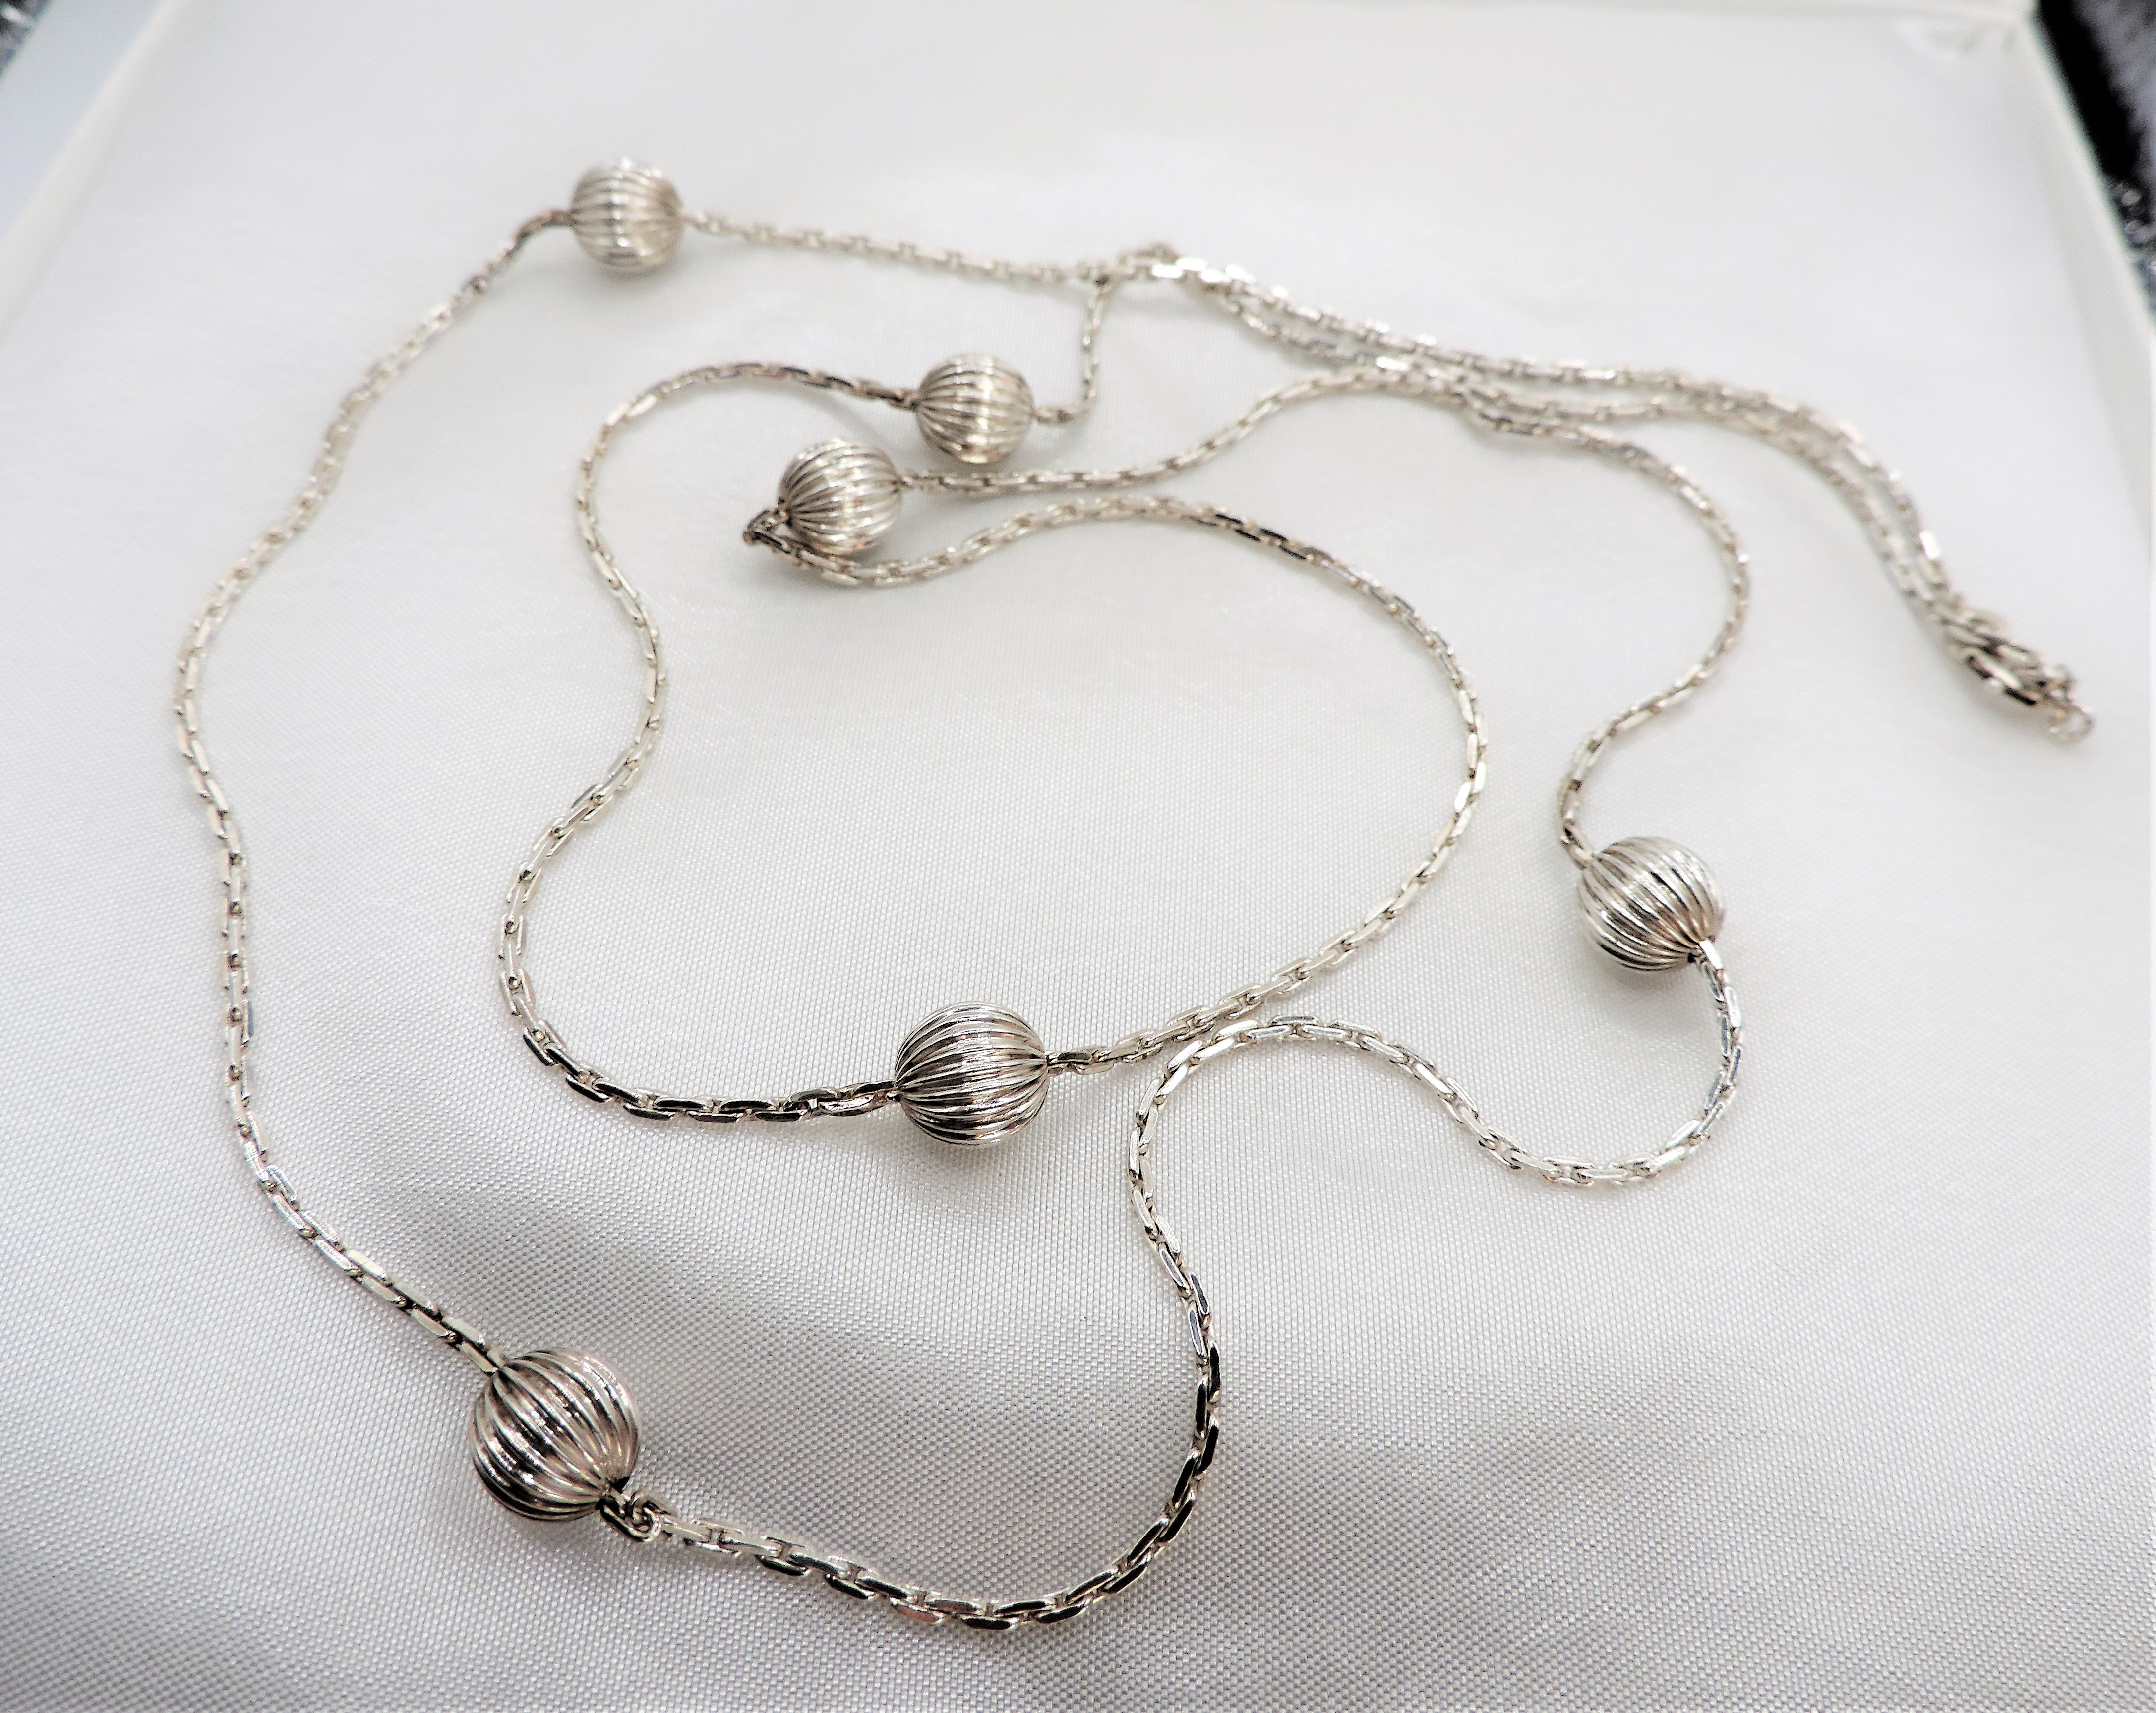 Sterling Silver 34 inch Ball & Chain Necklace Hallmarked. A beautiful sterling silver necklace